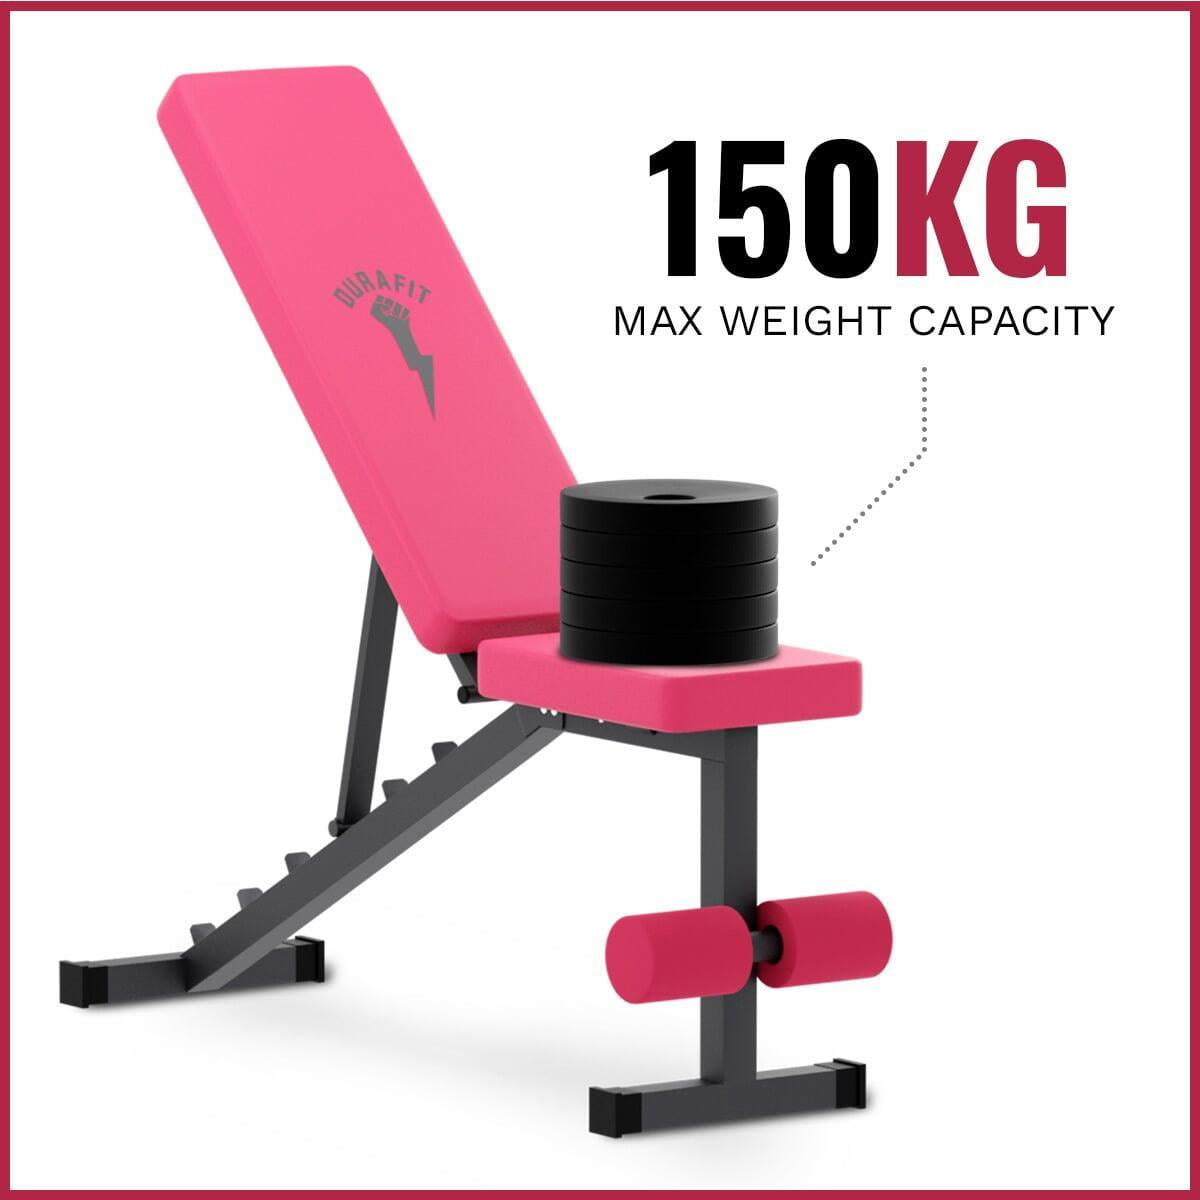 Durafit Foldable Bench FB01 with max user weight 150kg